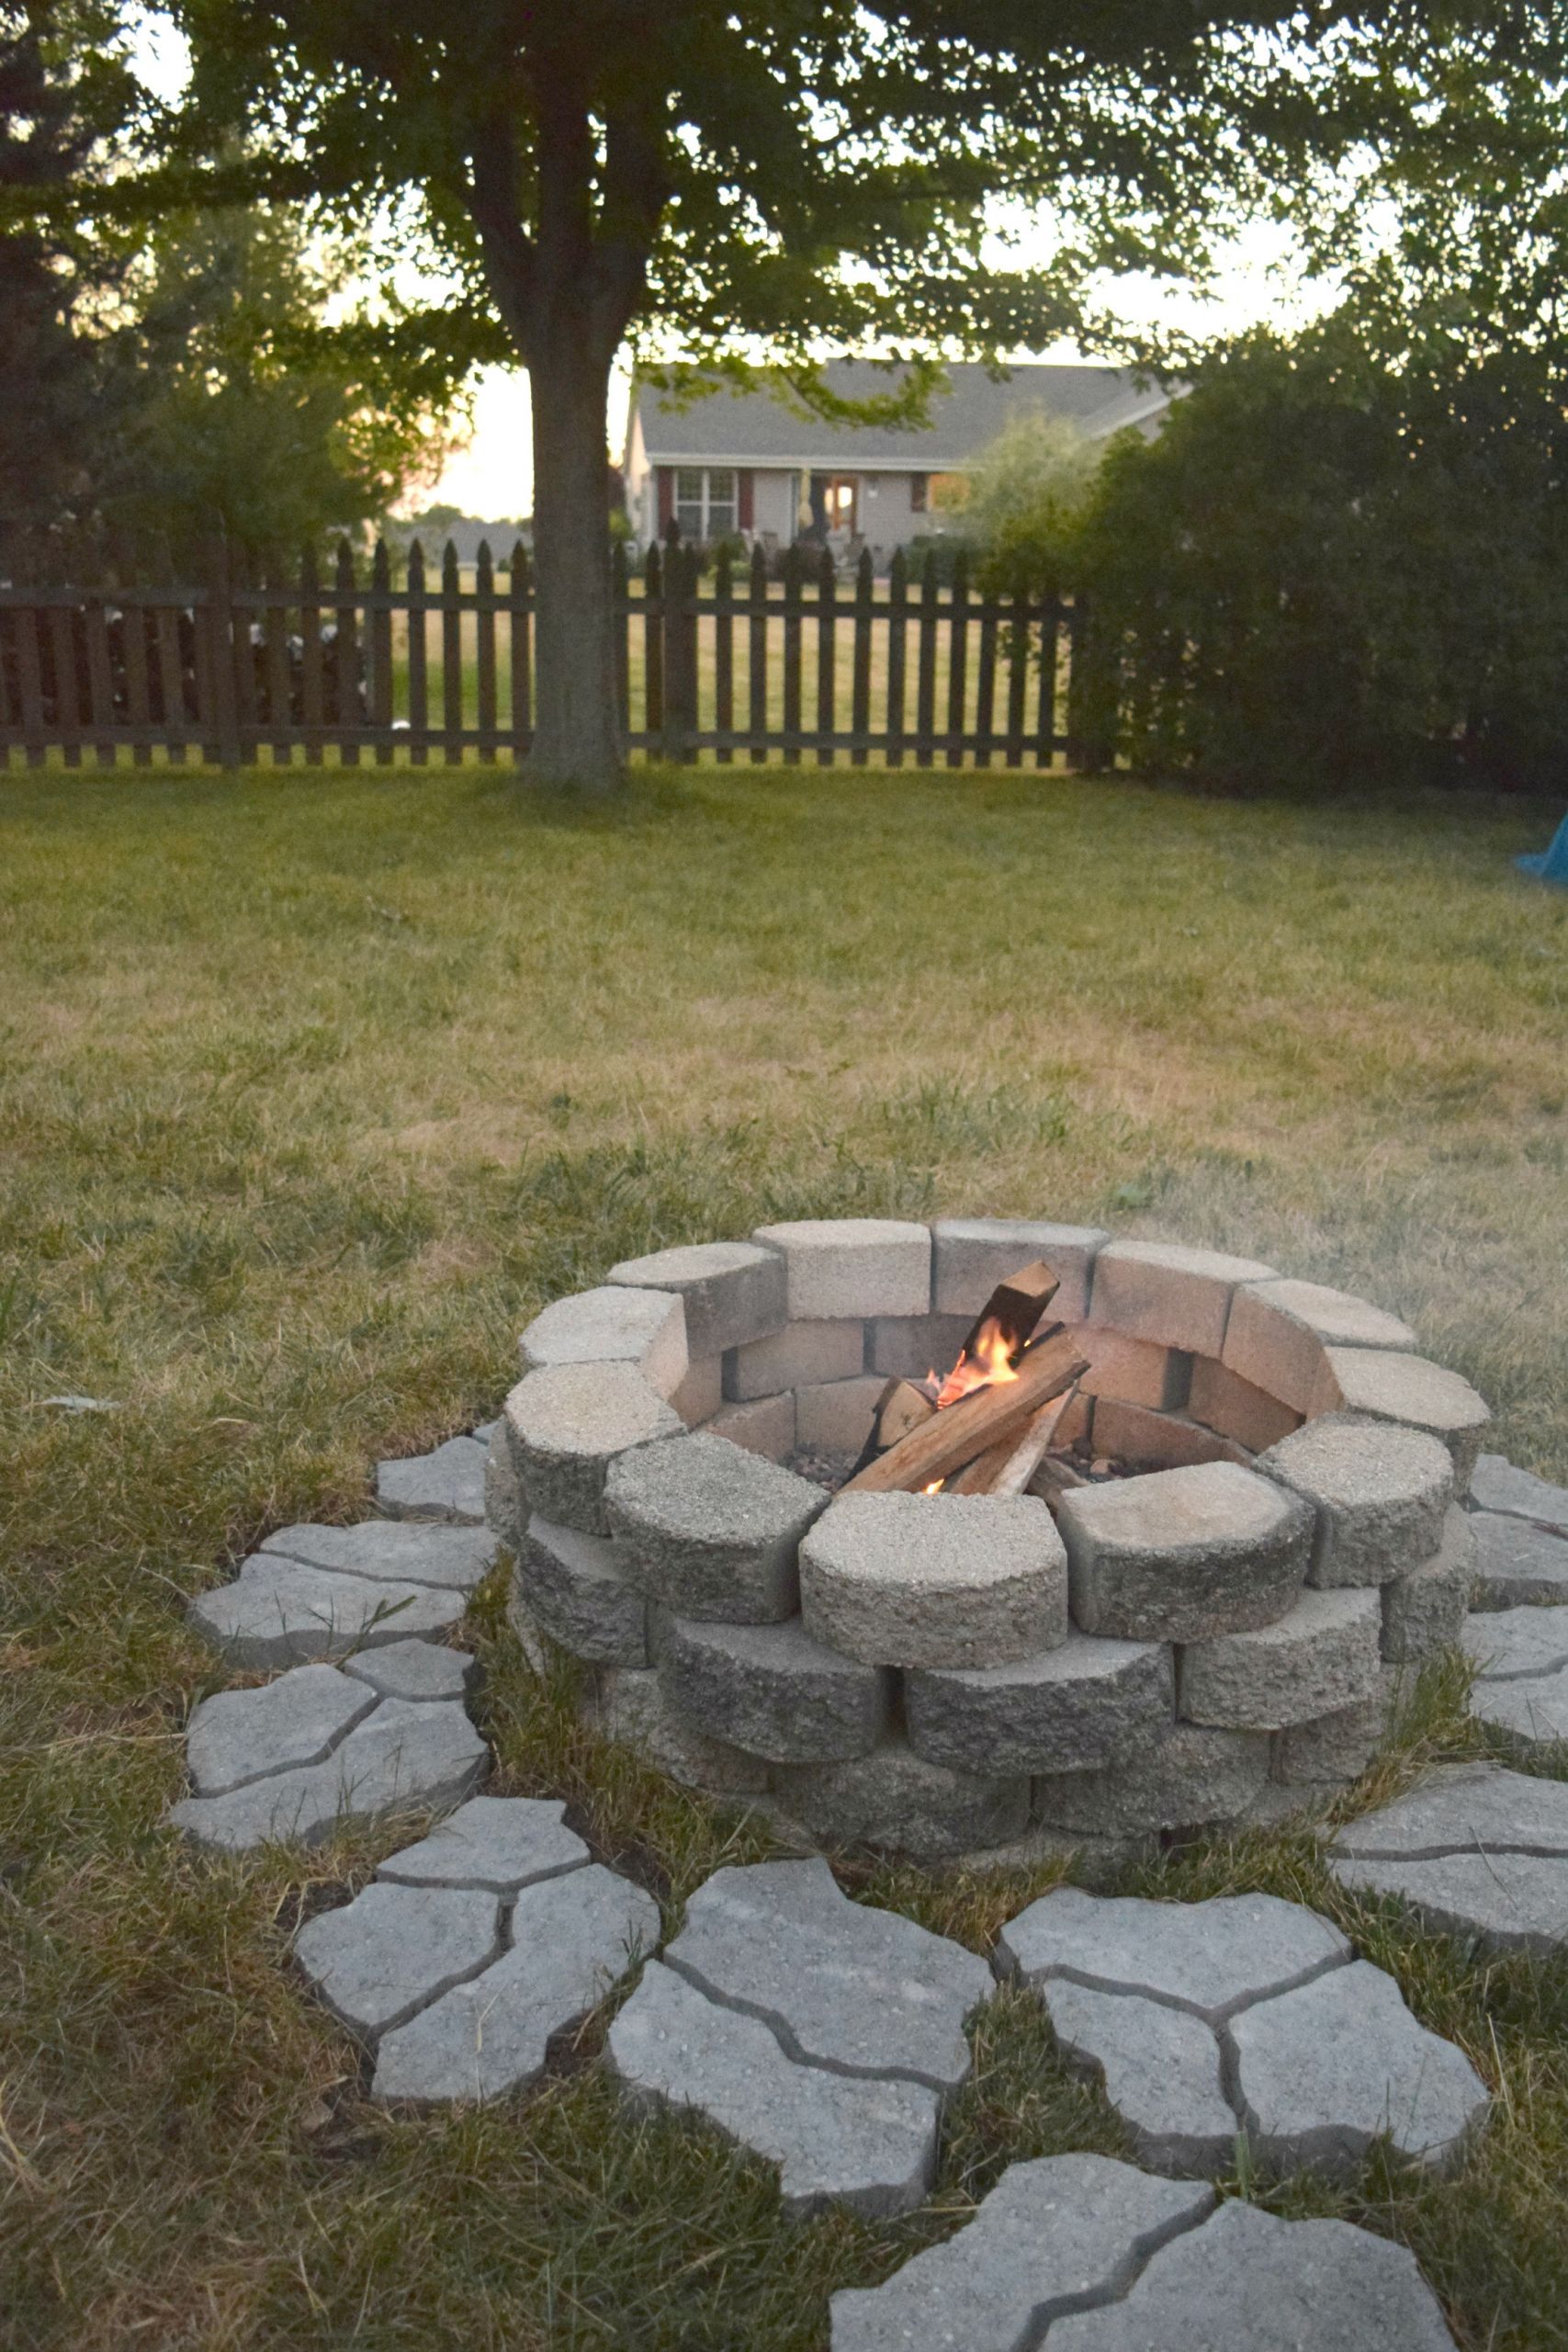 Diy Outdoor Fire Pit
 "Light up the Night" outdoor living in the sparkle of